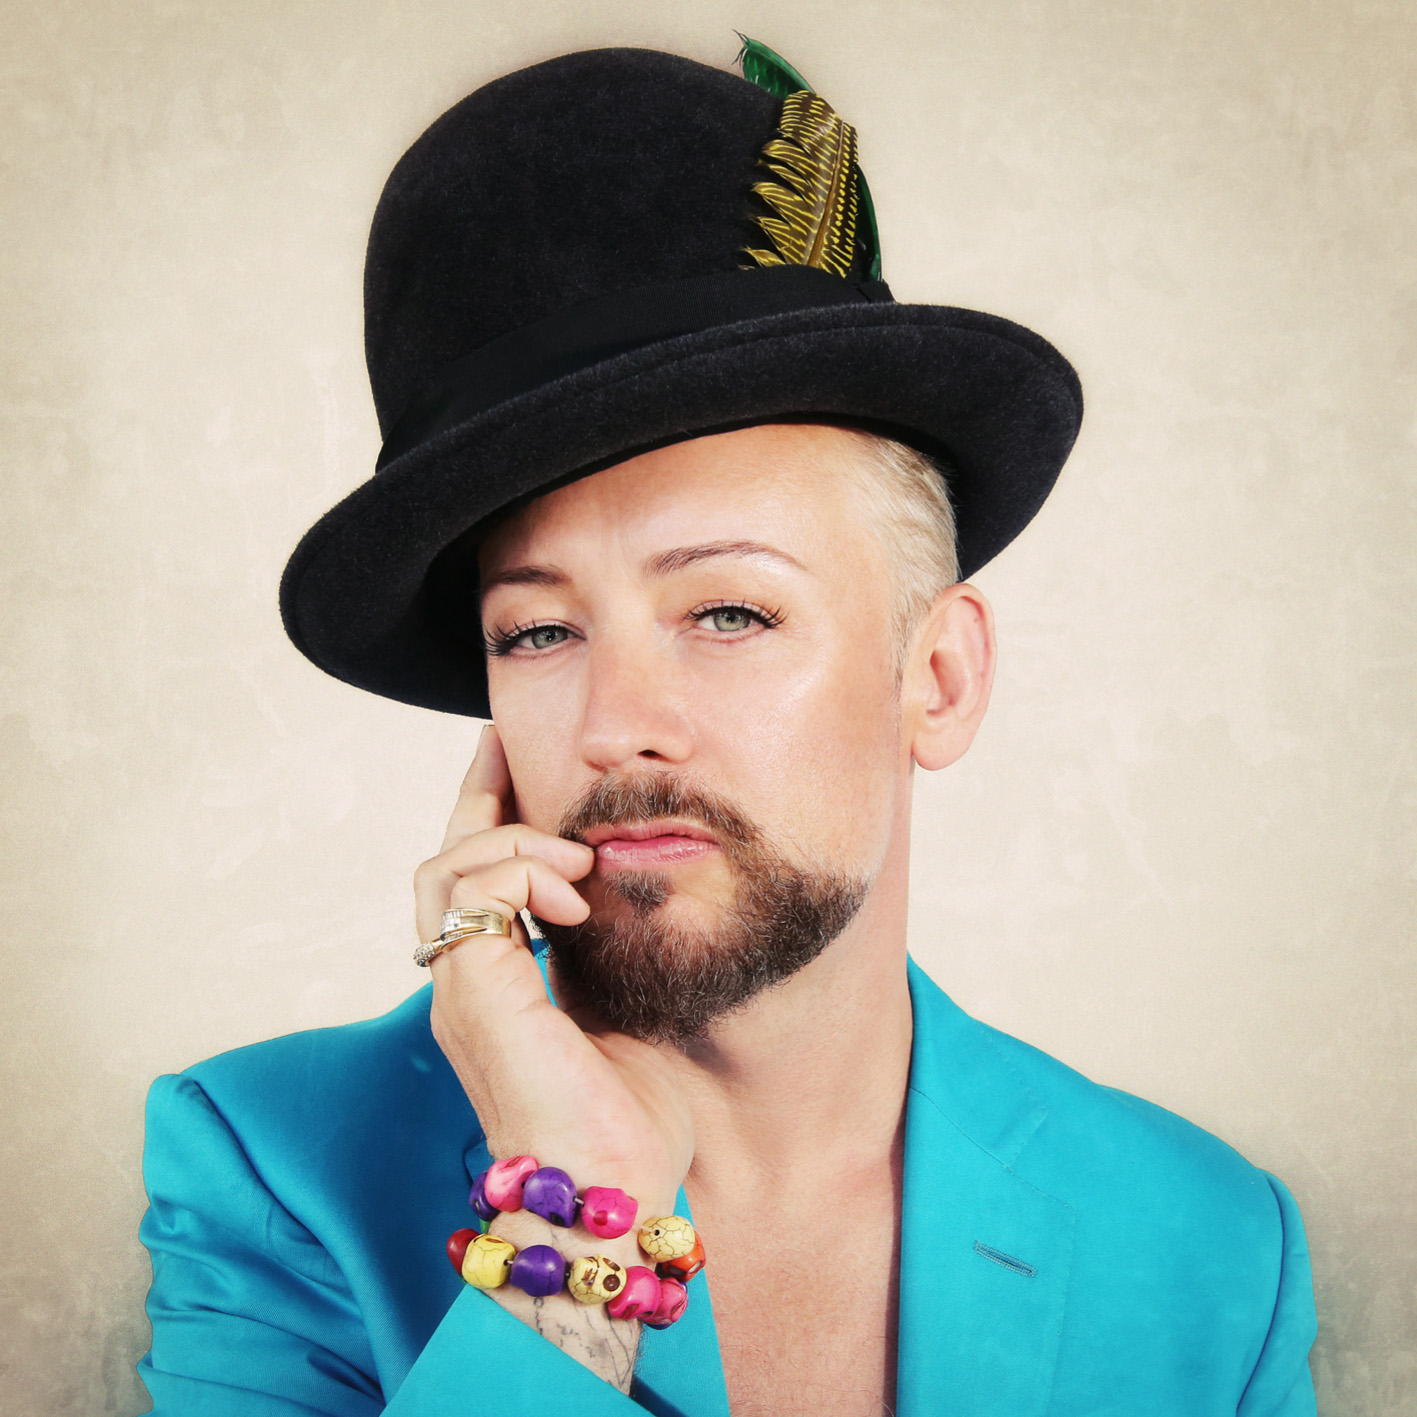 Boy George - "This Is What I Do"